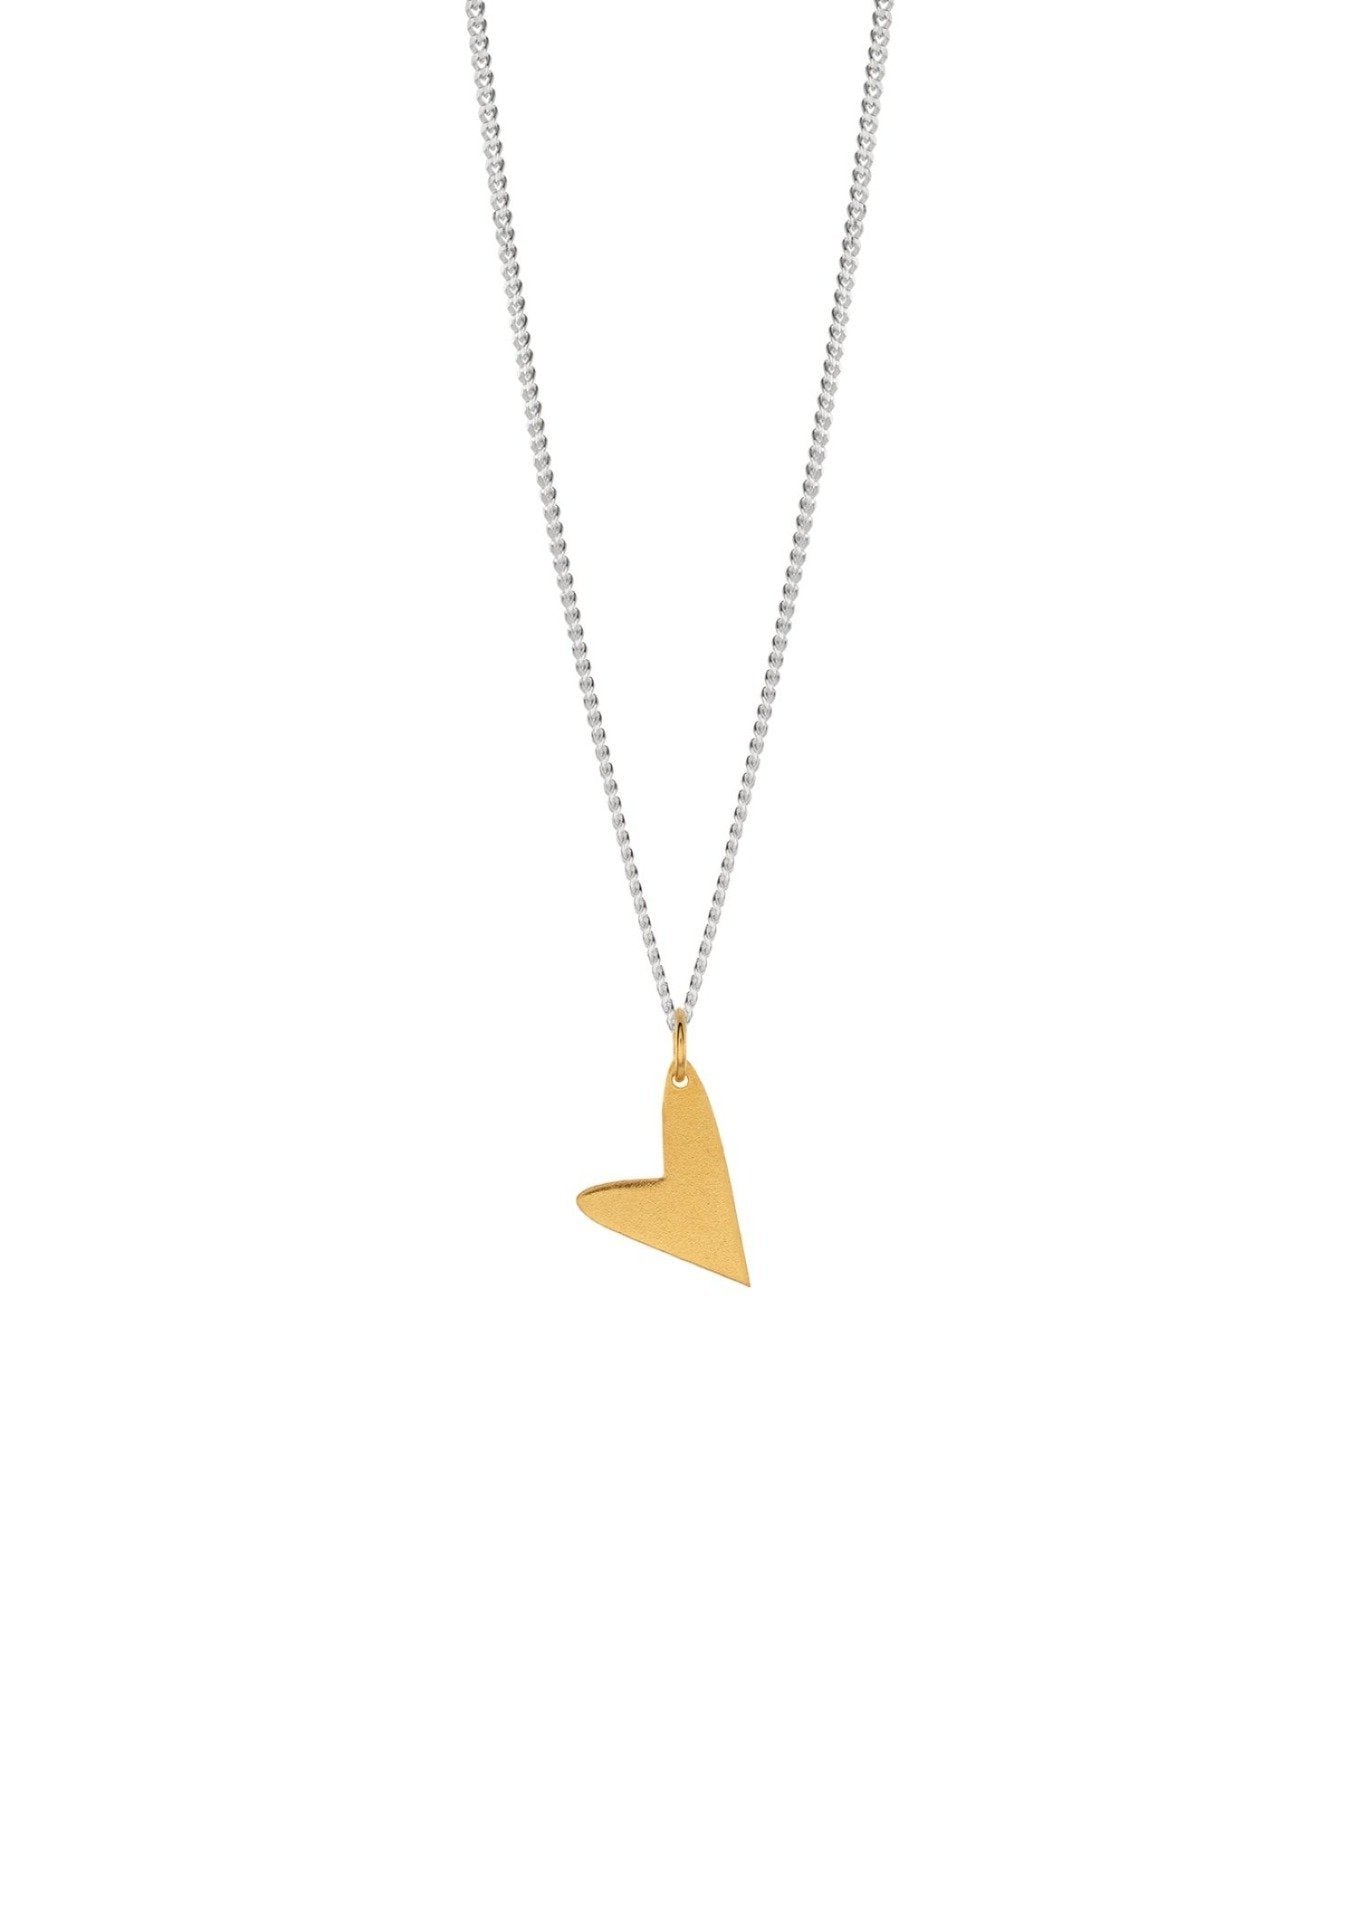 NO MORE accessories Love Necklace in sterling silver with gold plated sterling silver pendant